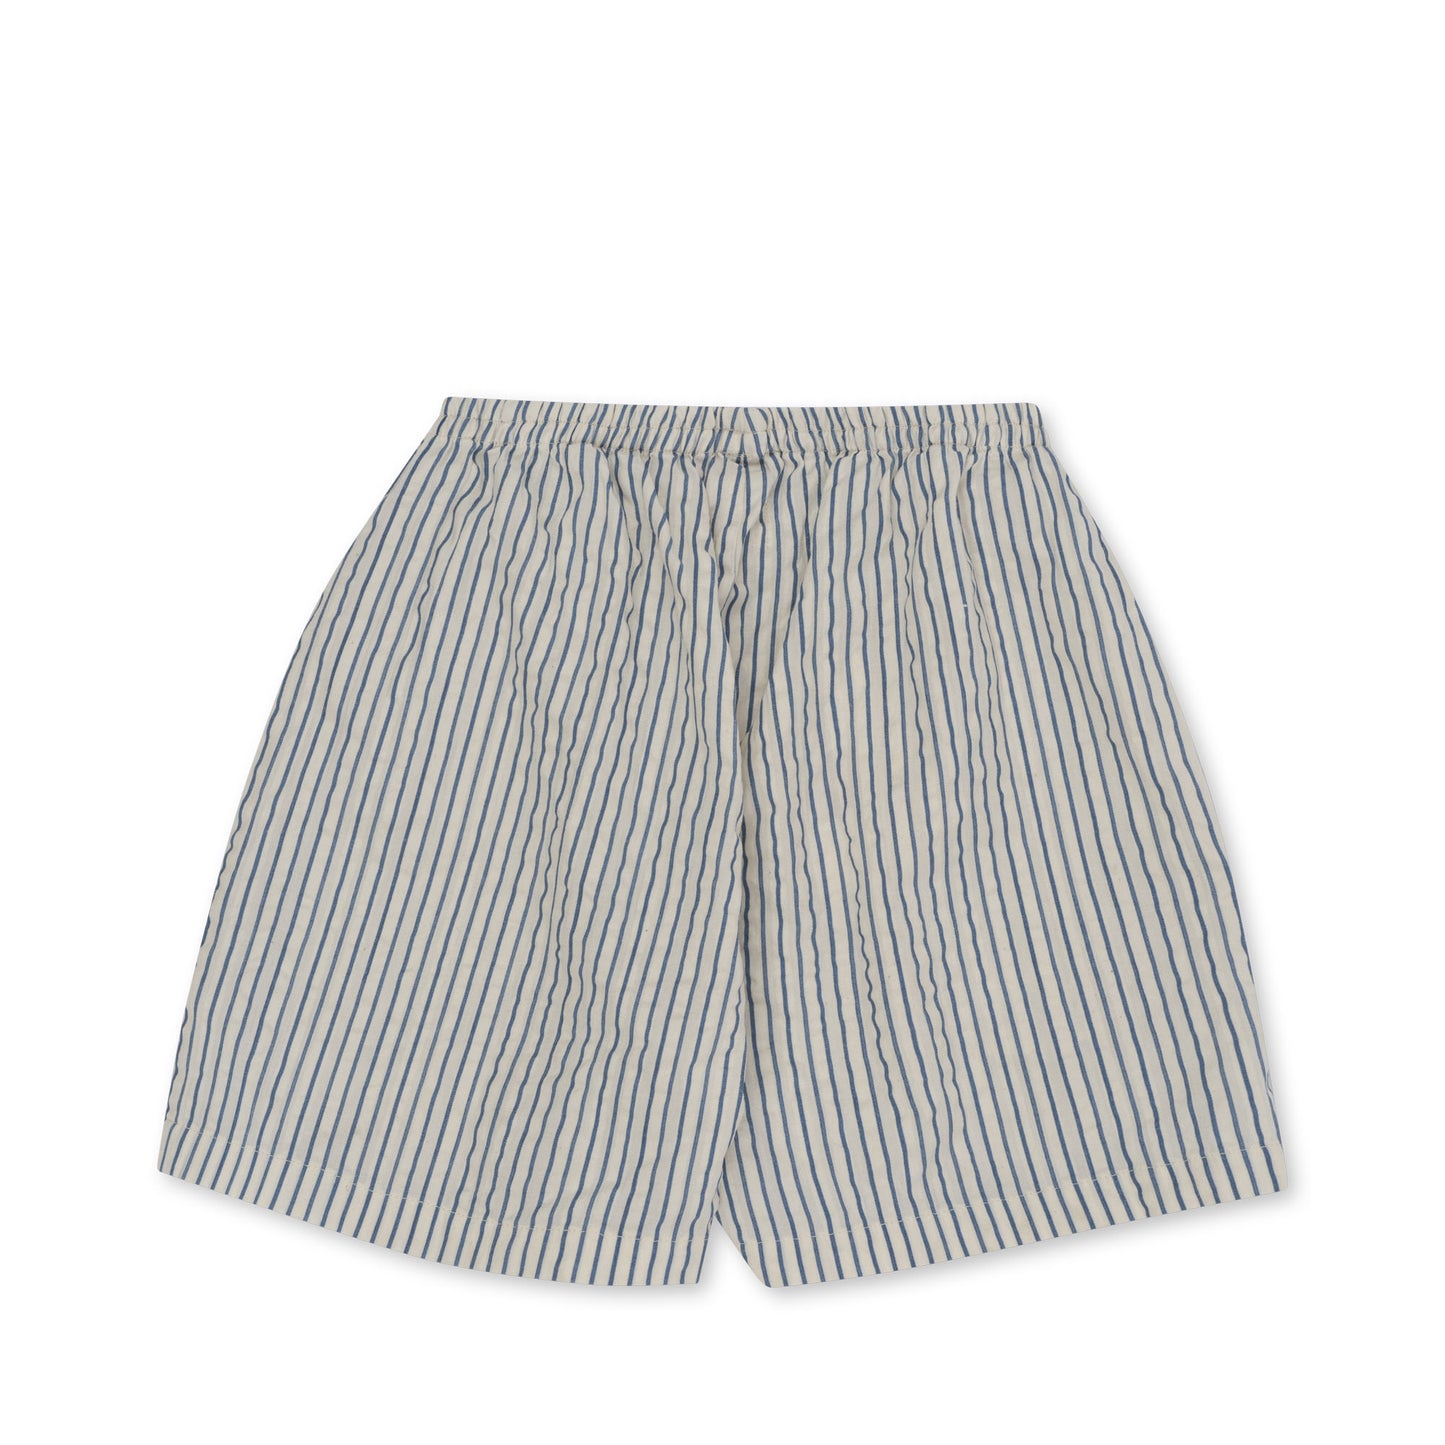 Ace Shorts in Striped Bluie